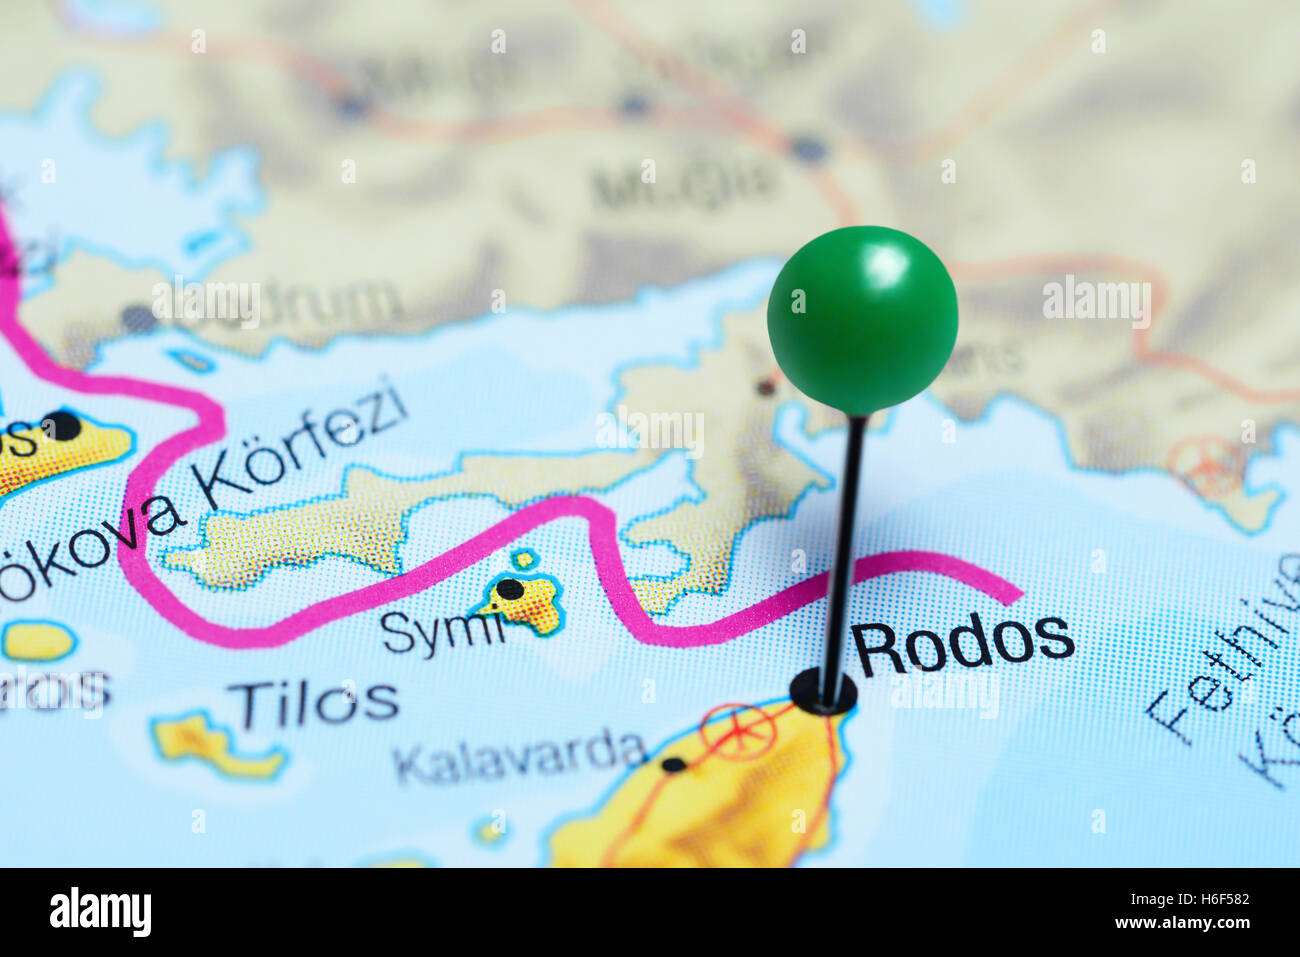 Rodos pinned on a map of Greece Stock Photo